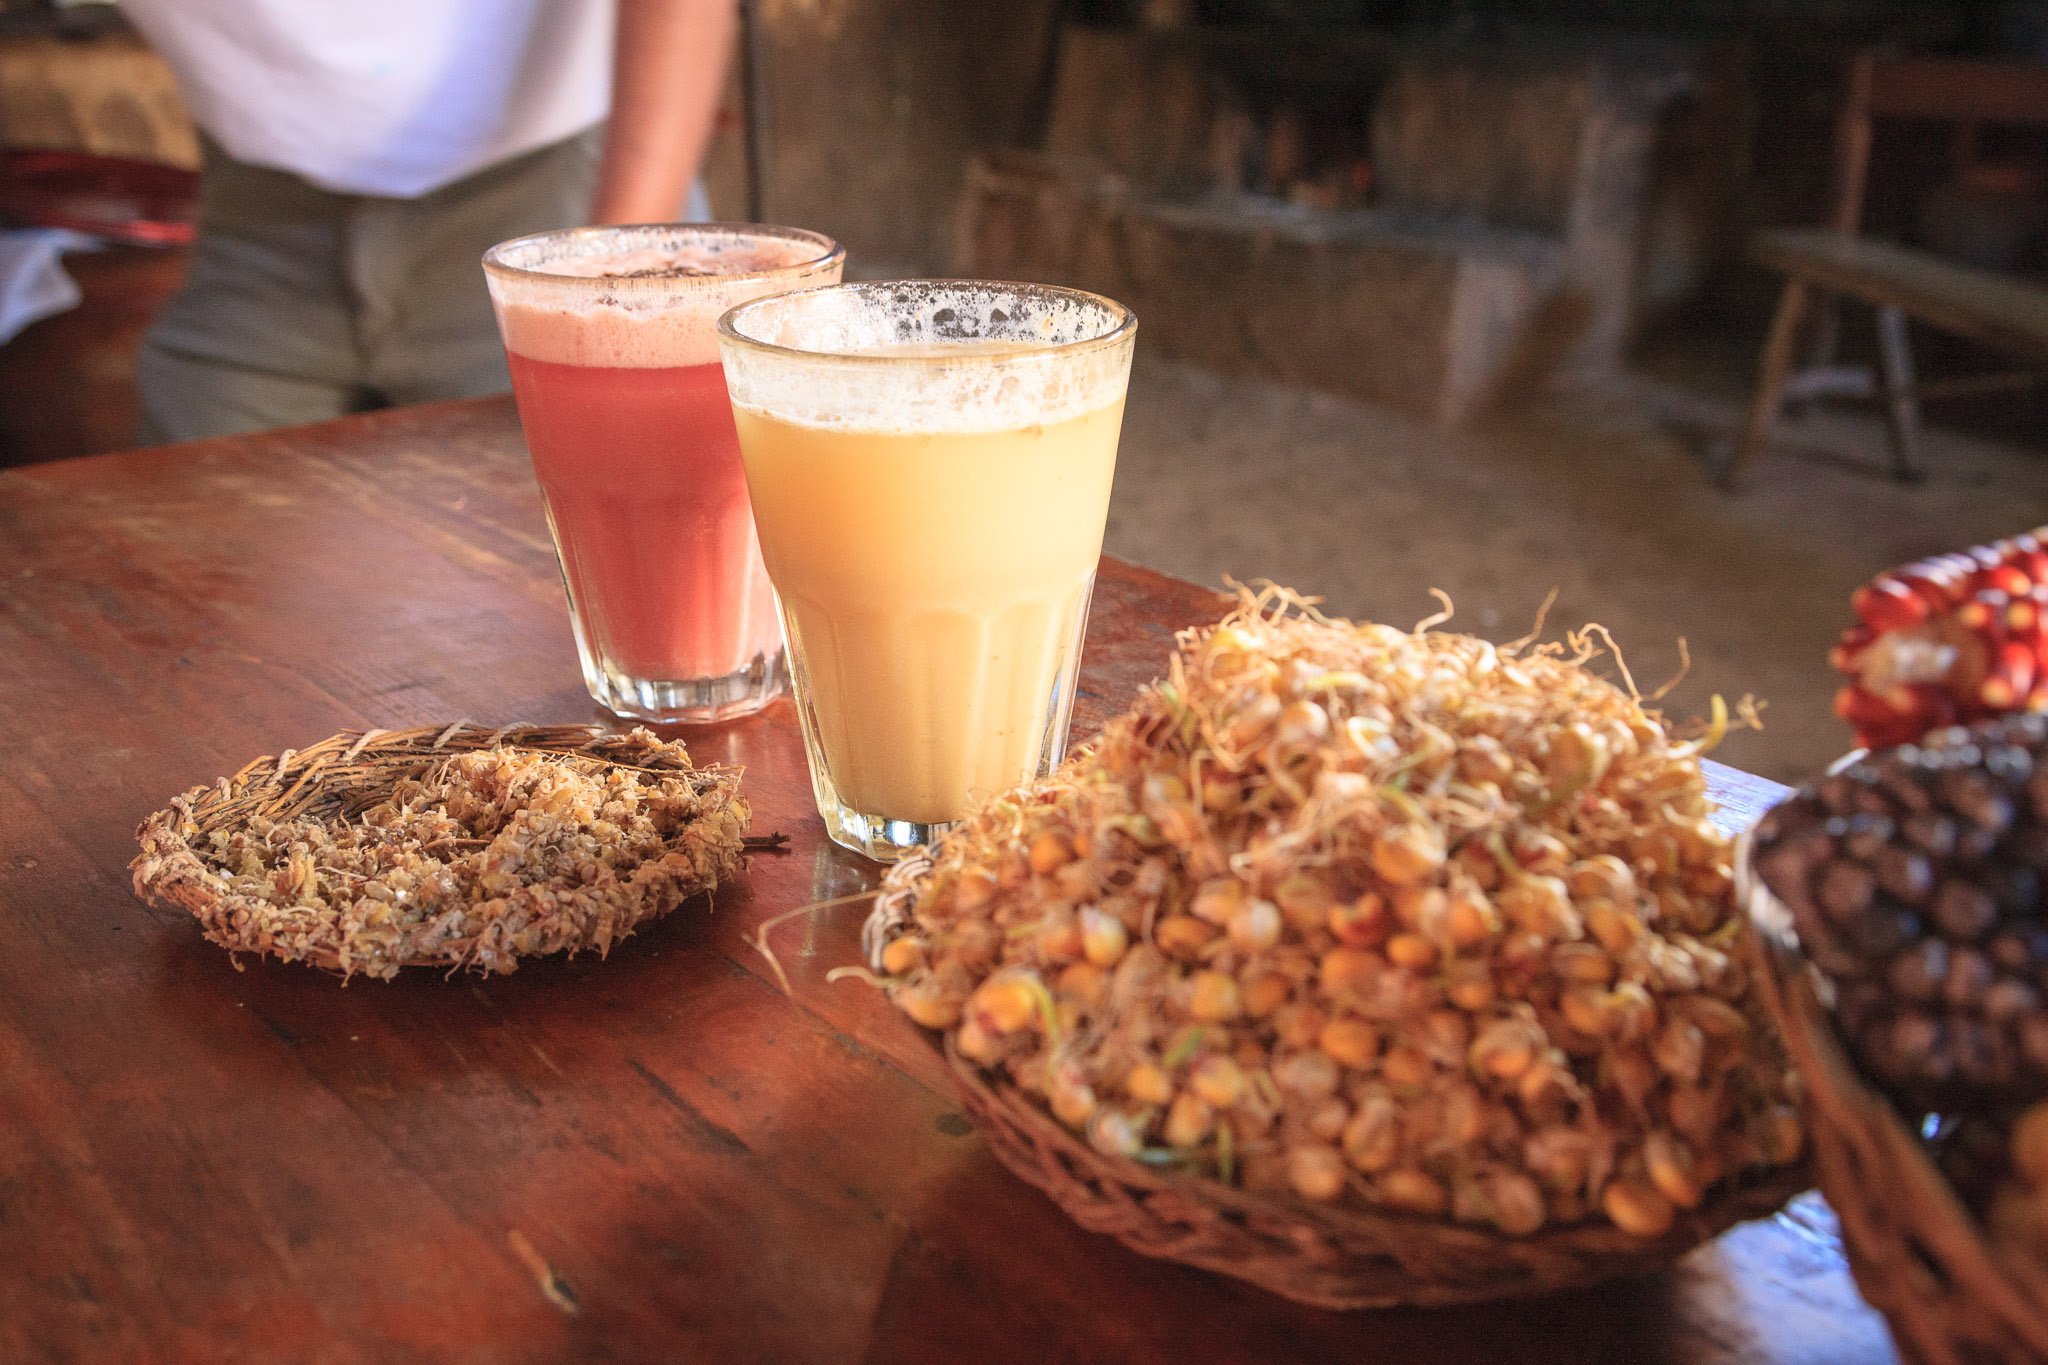 Chicha, beer made from sprouted maize